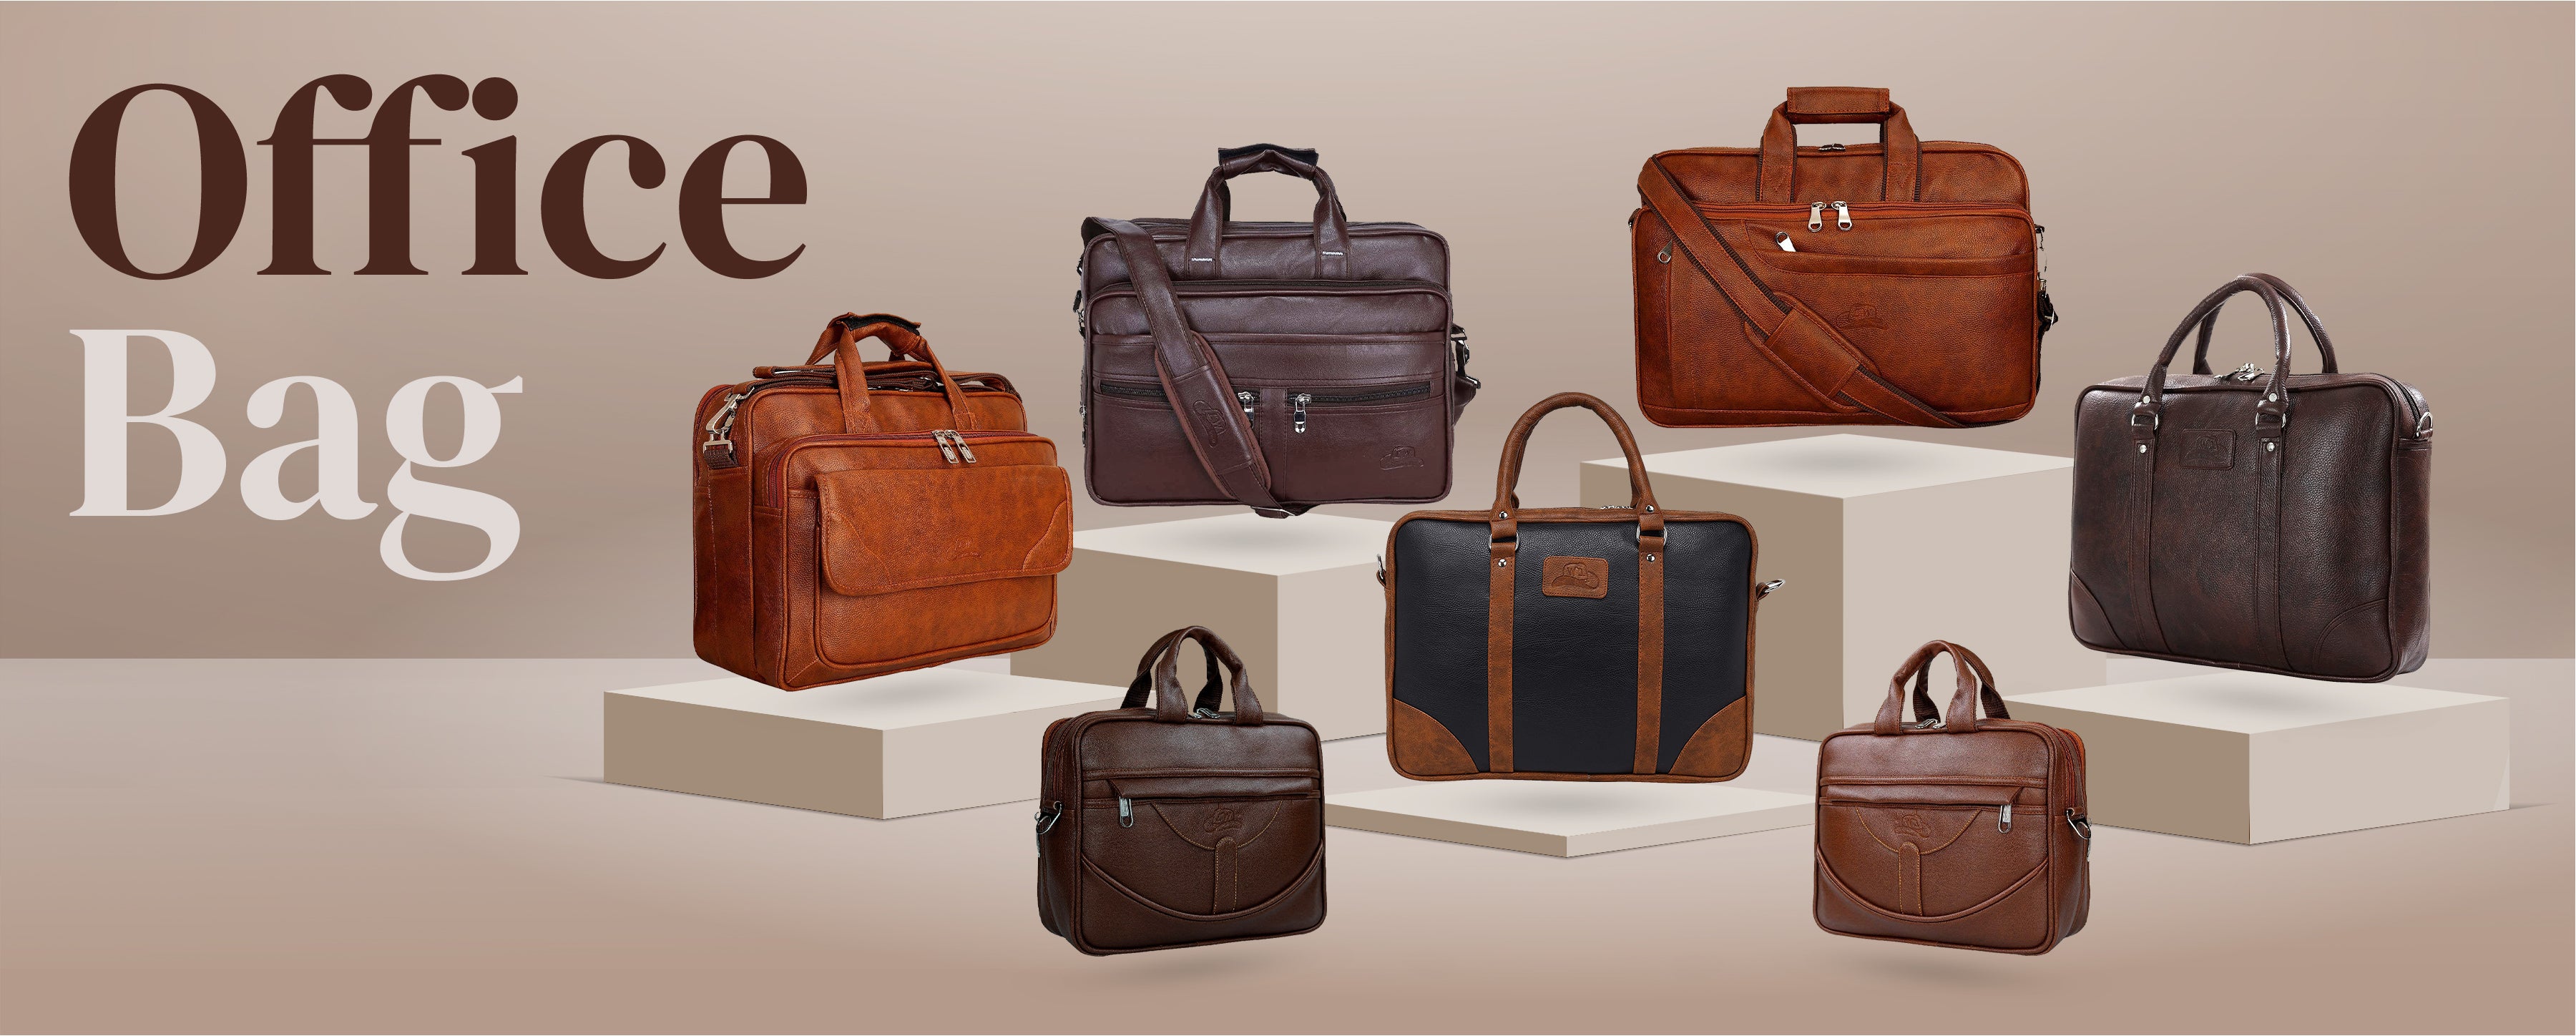 Buy Leather Office Bag & Laptop Bags Online at Price in India – Leatherworldonline.net